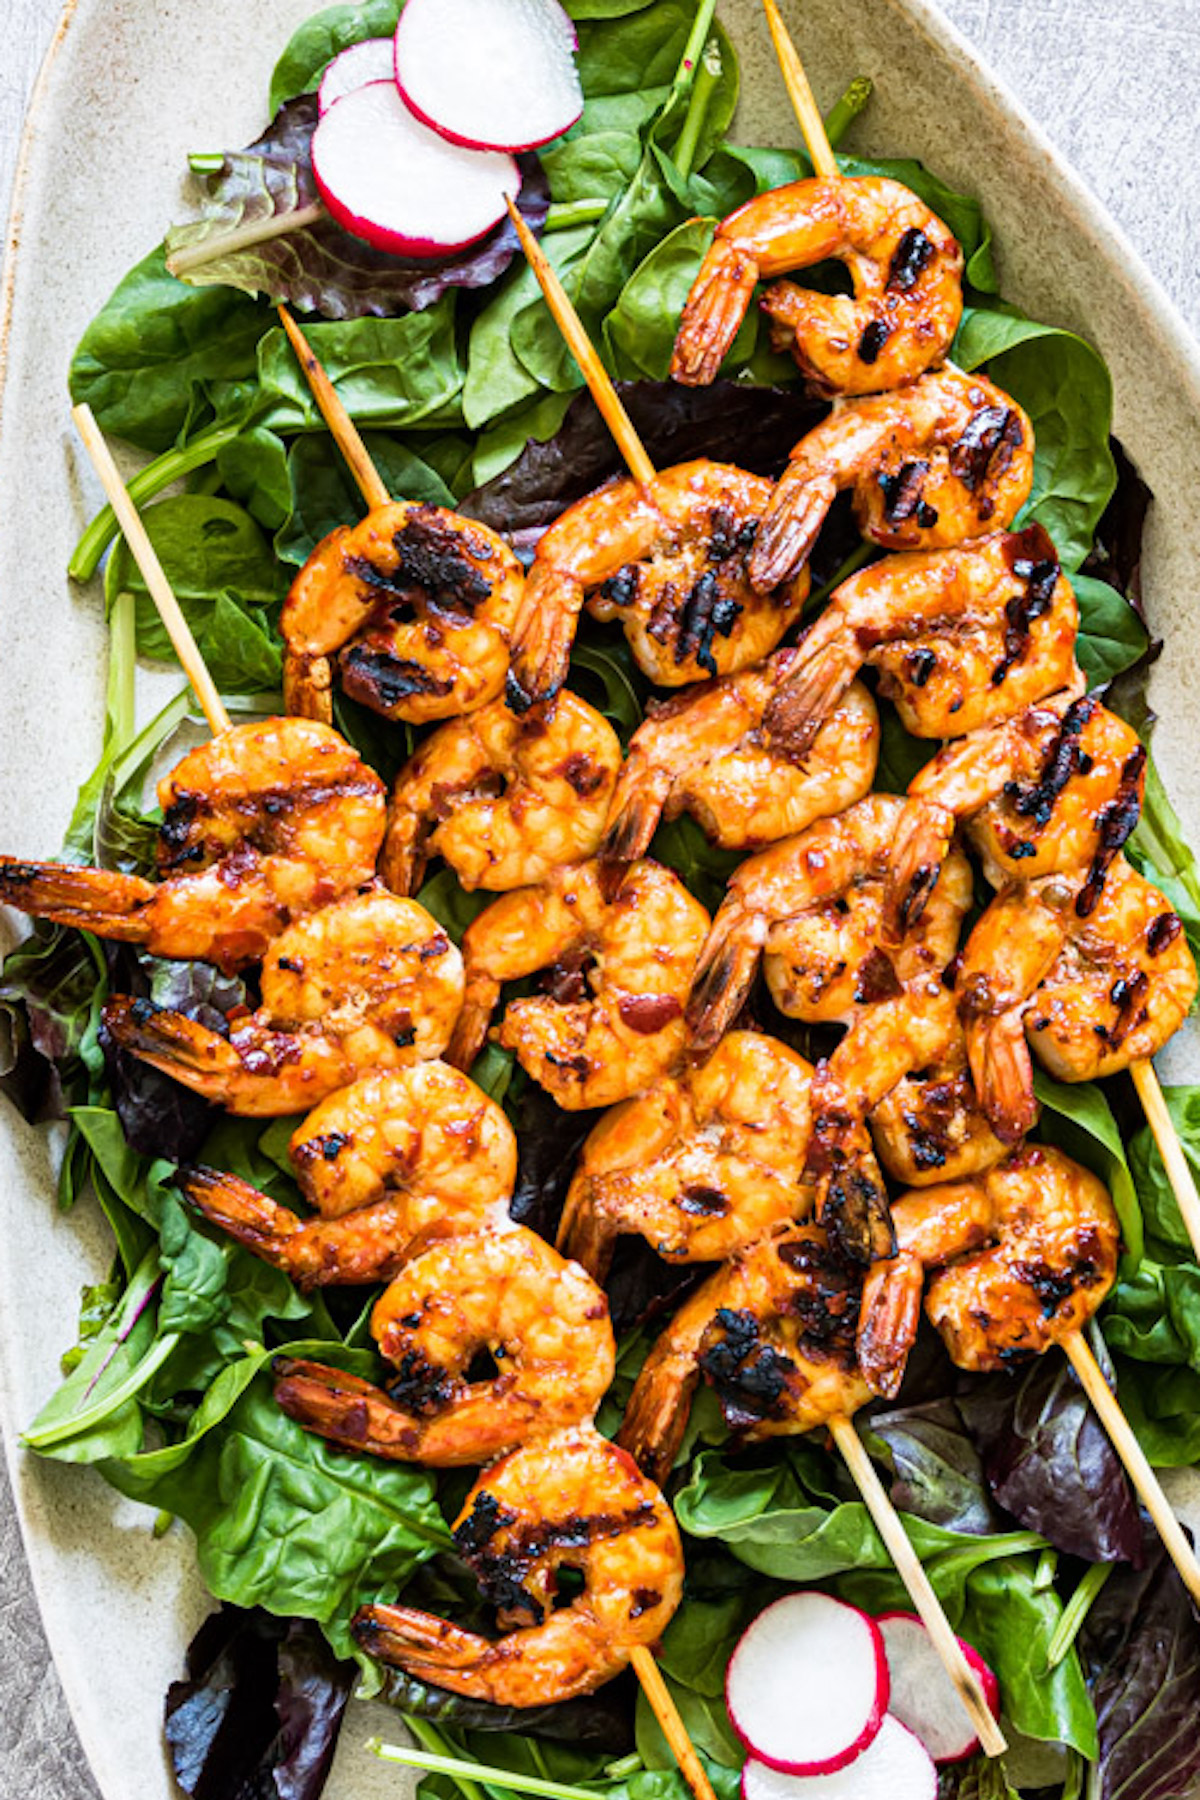 the finished prawns served on the skewers sitting on a beg of lettuce